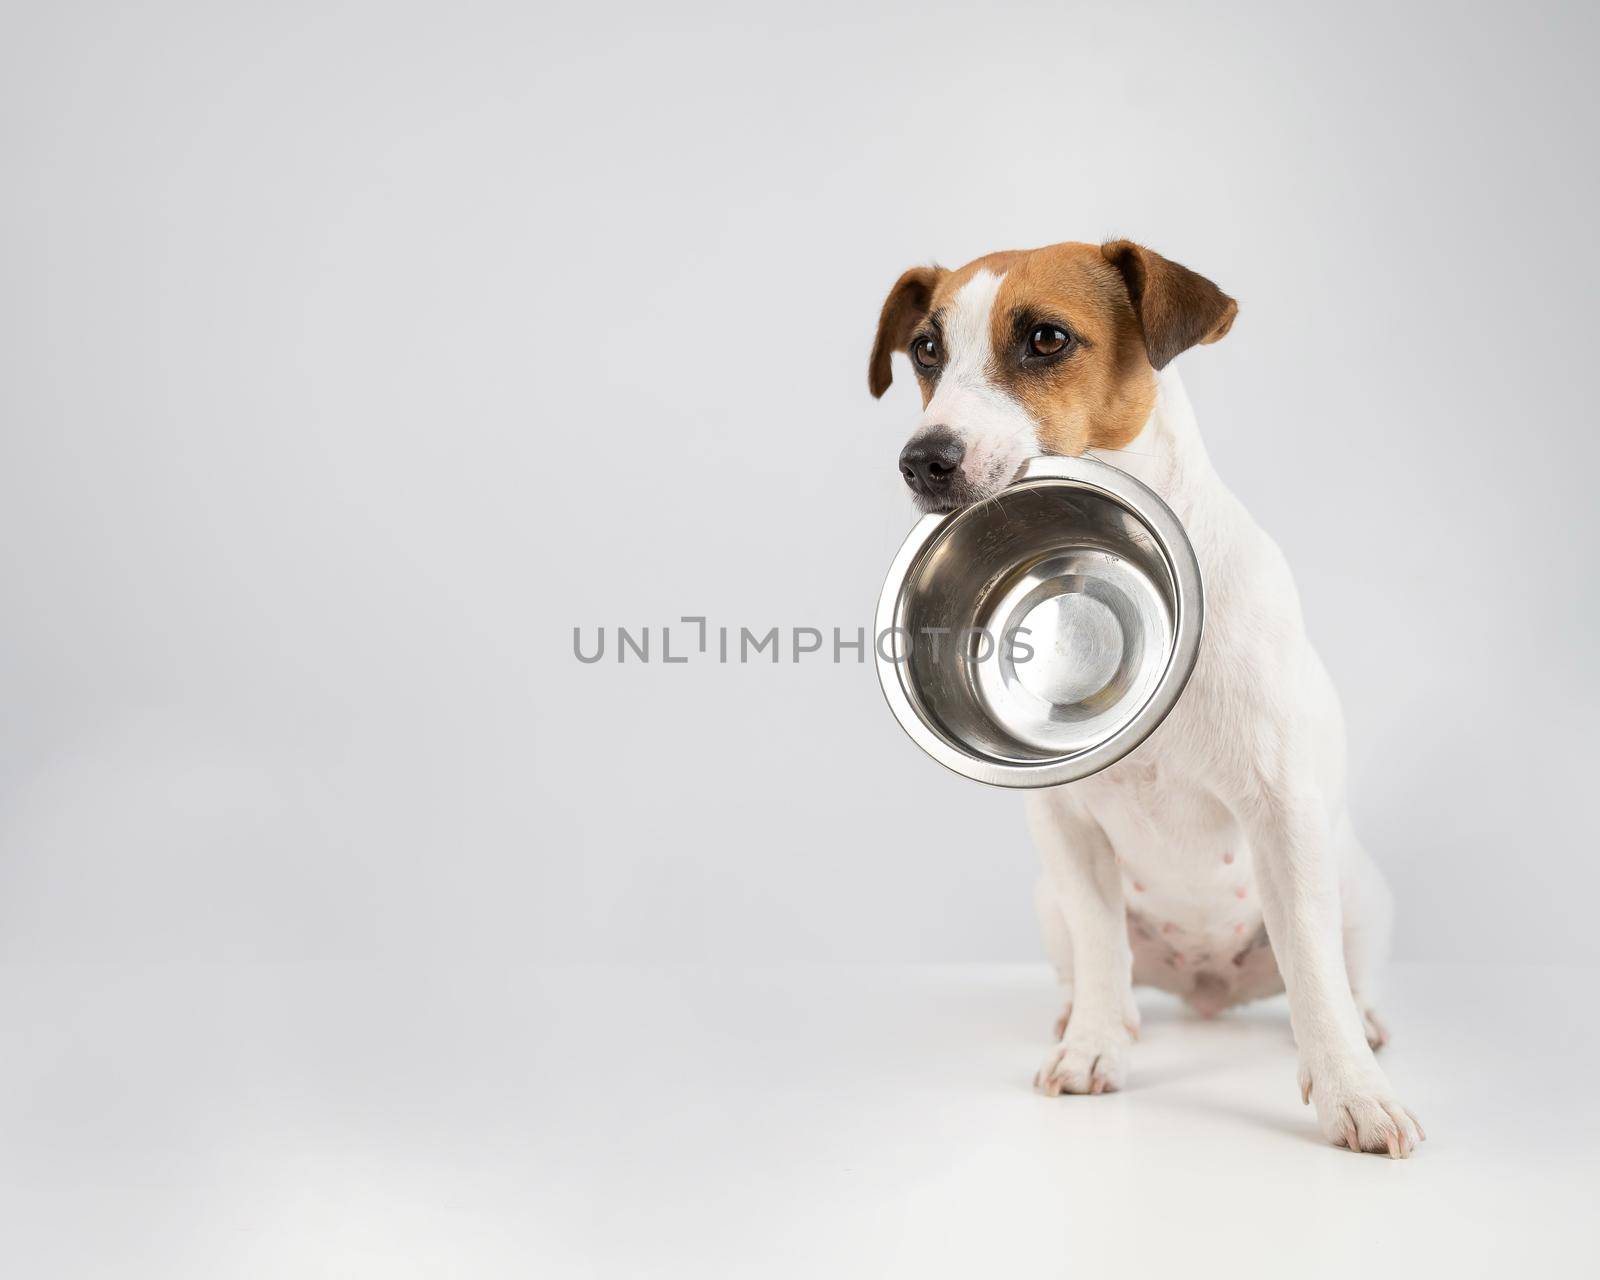 Hungry jack russell terrier holding an empty bowl on a white background. The dog asks for food. by mrwed54